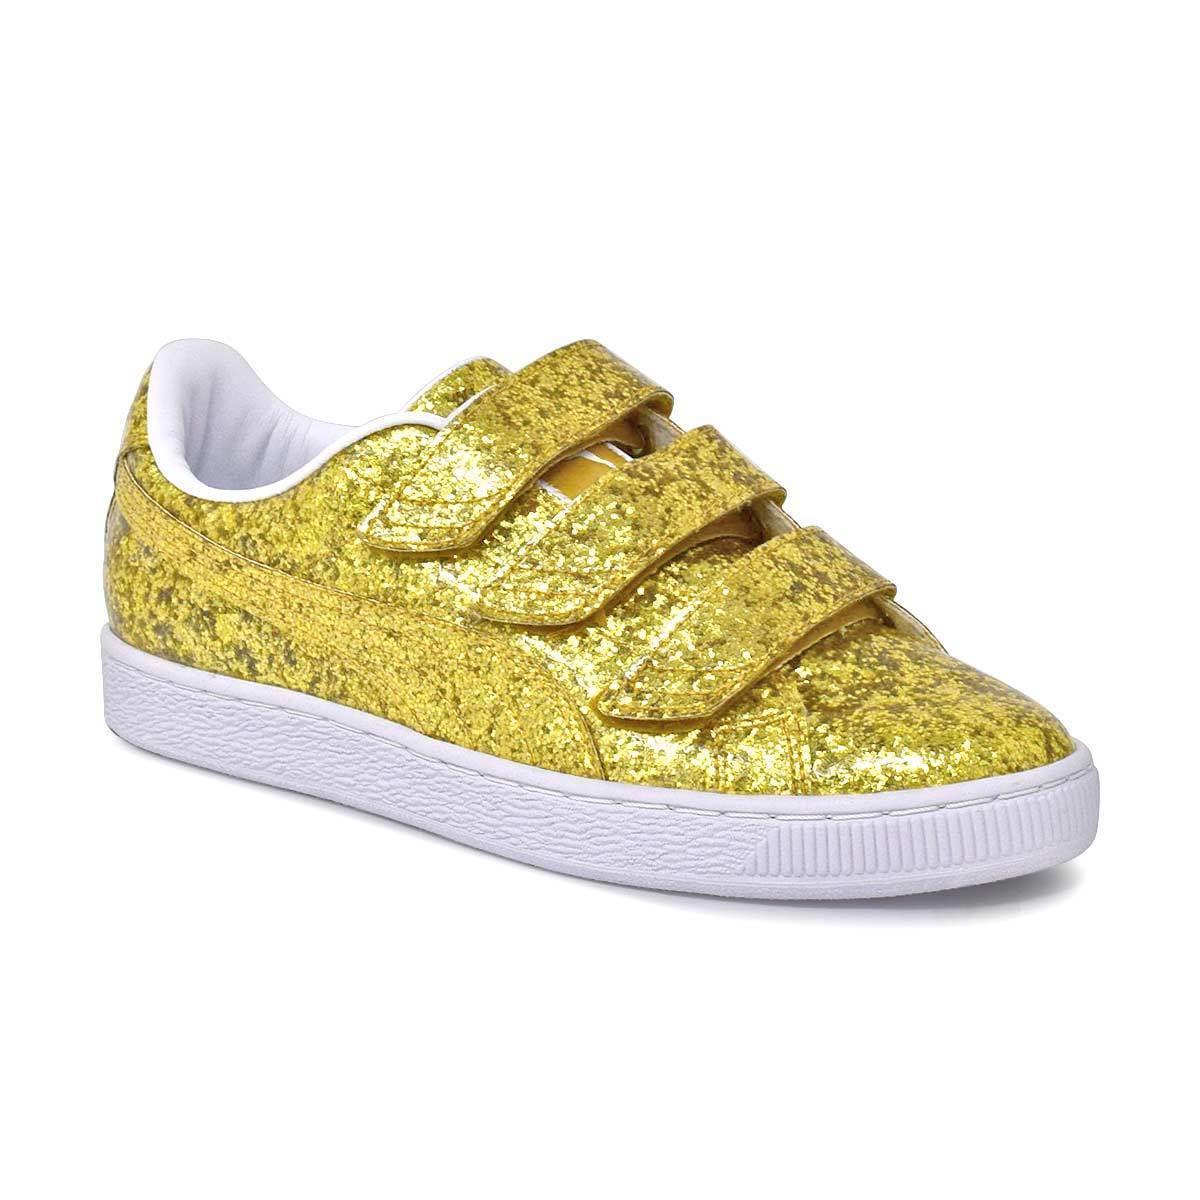 Puma Basket Strap Glitter 364070 02 Women`s Gold Low Top Sneakers Shoes C2099 - Gold